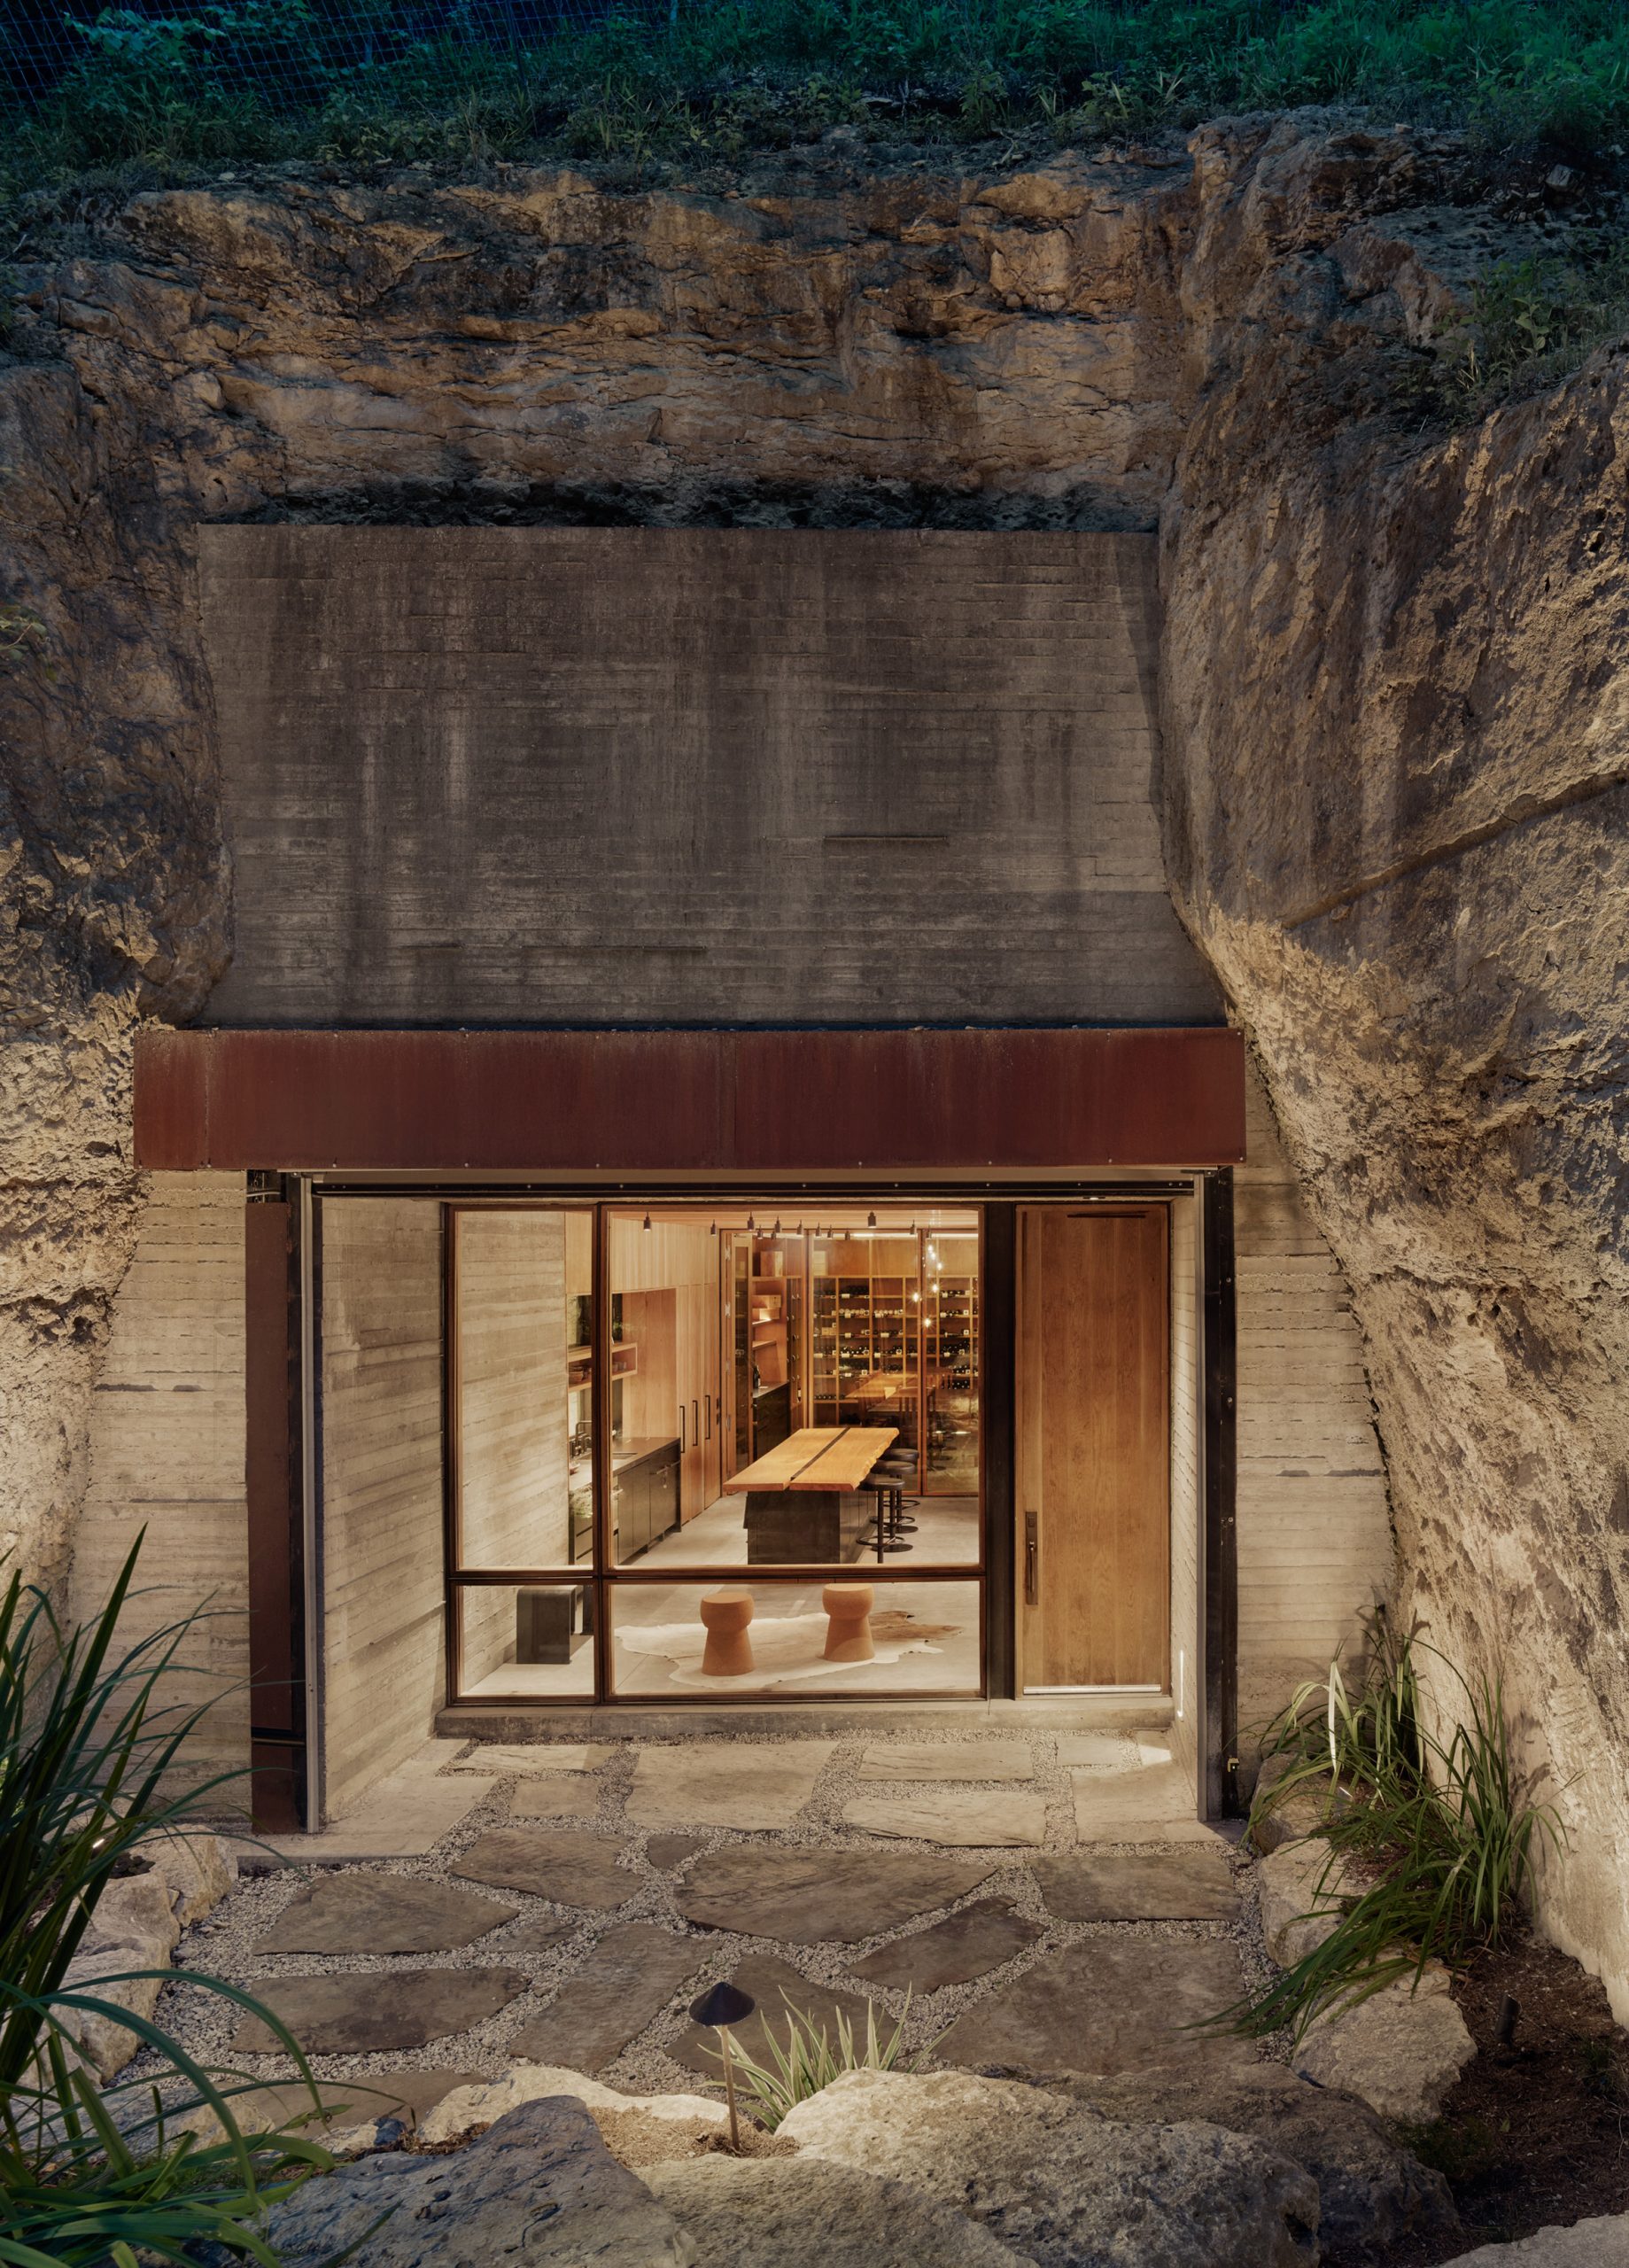 Entrance of the Hill Country Wine Cave by Clayton Korte